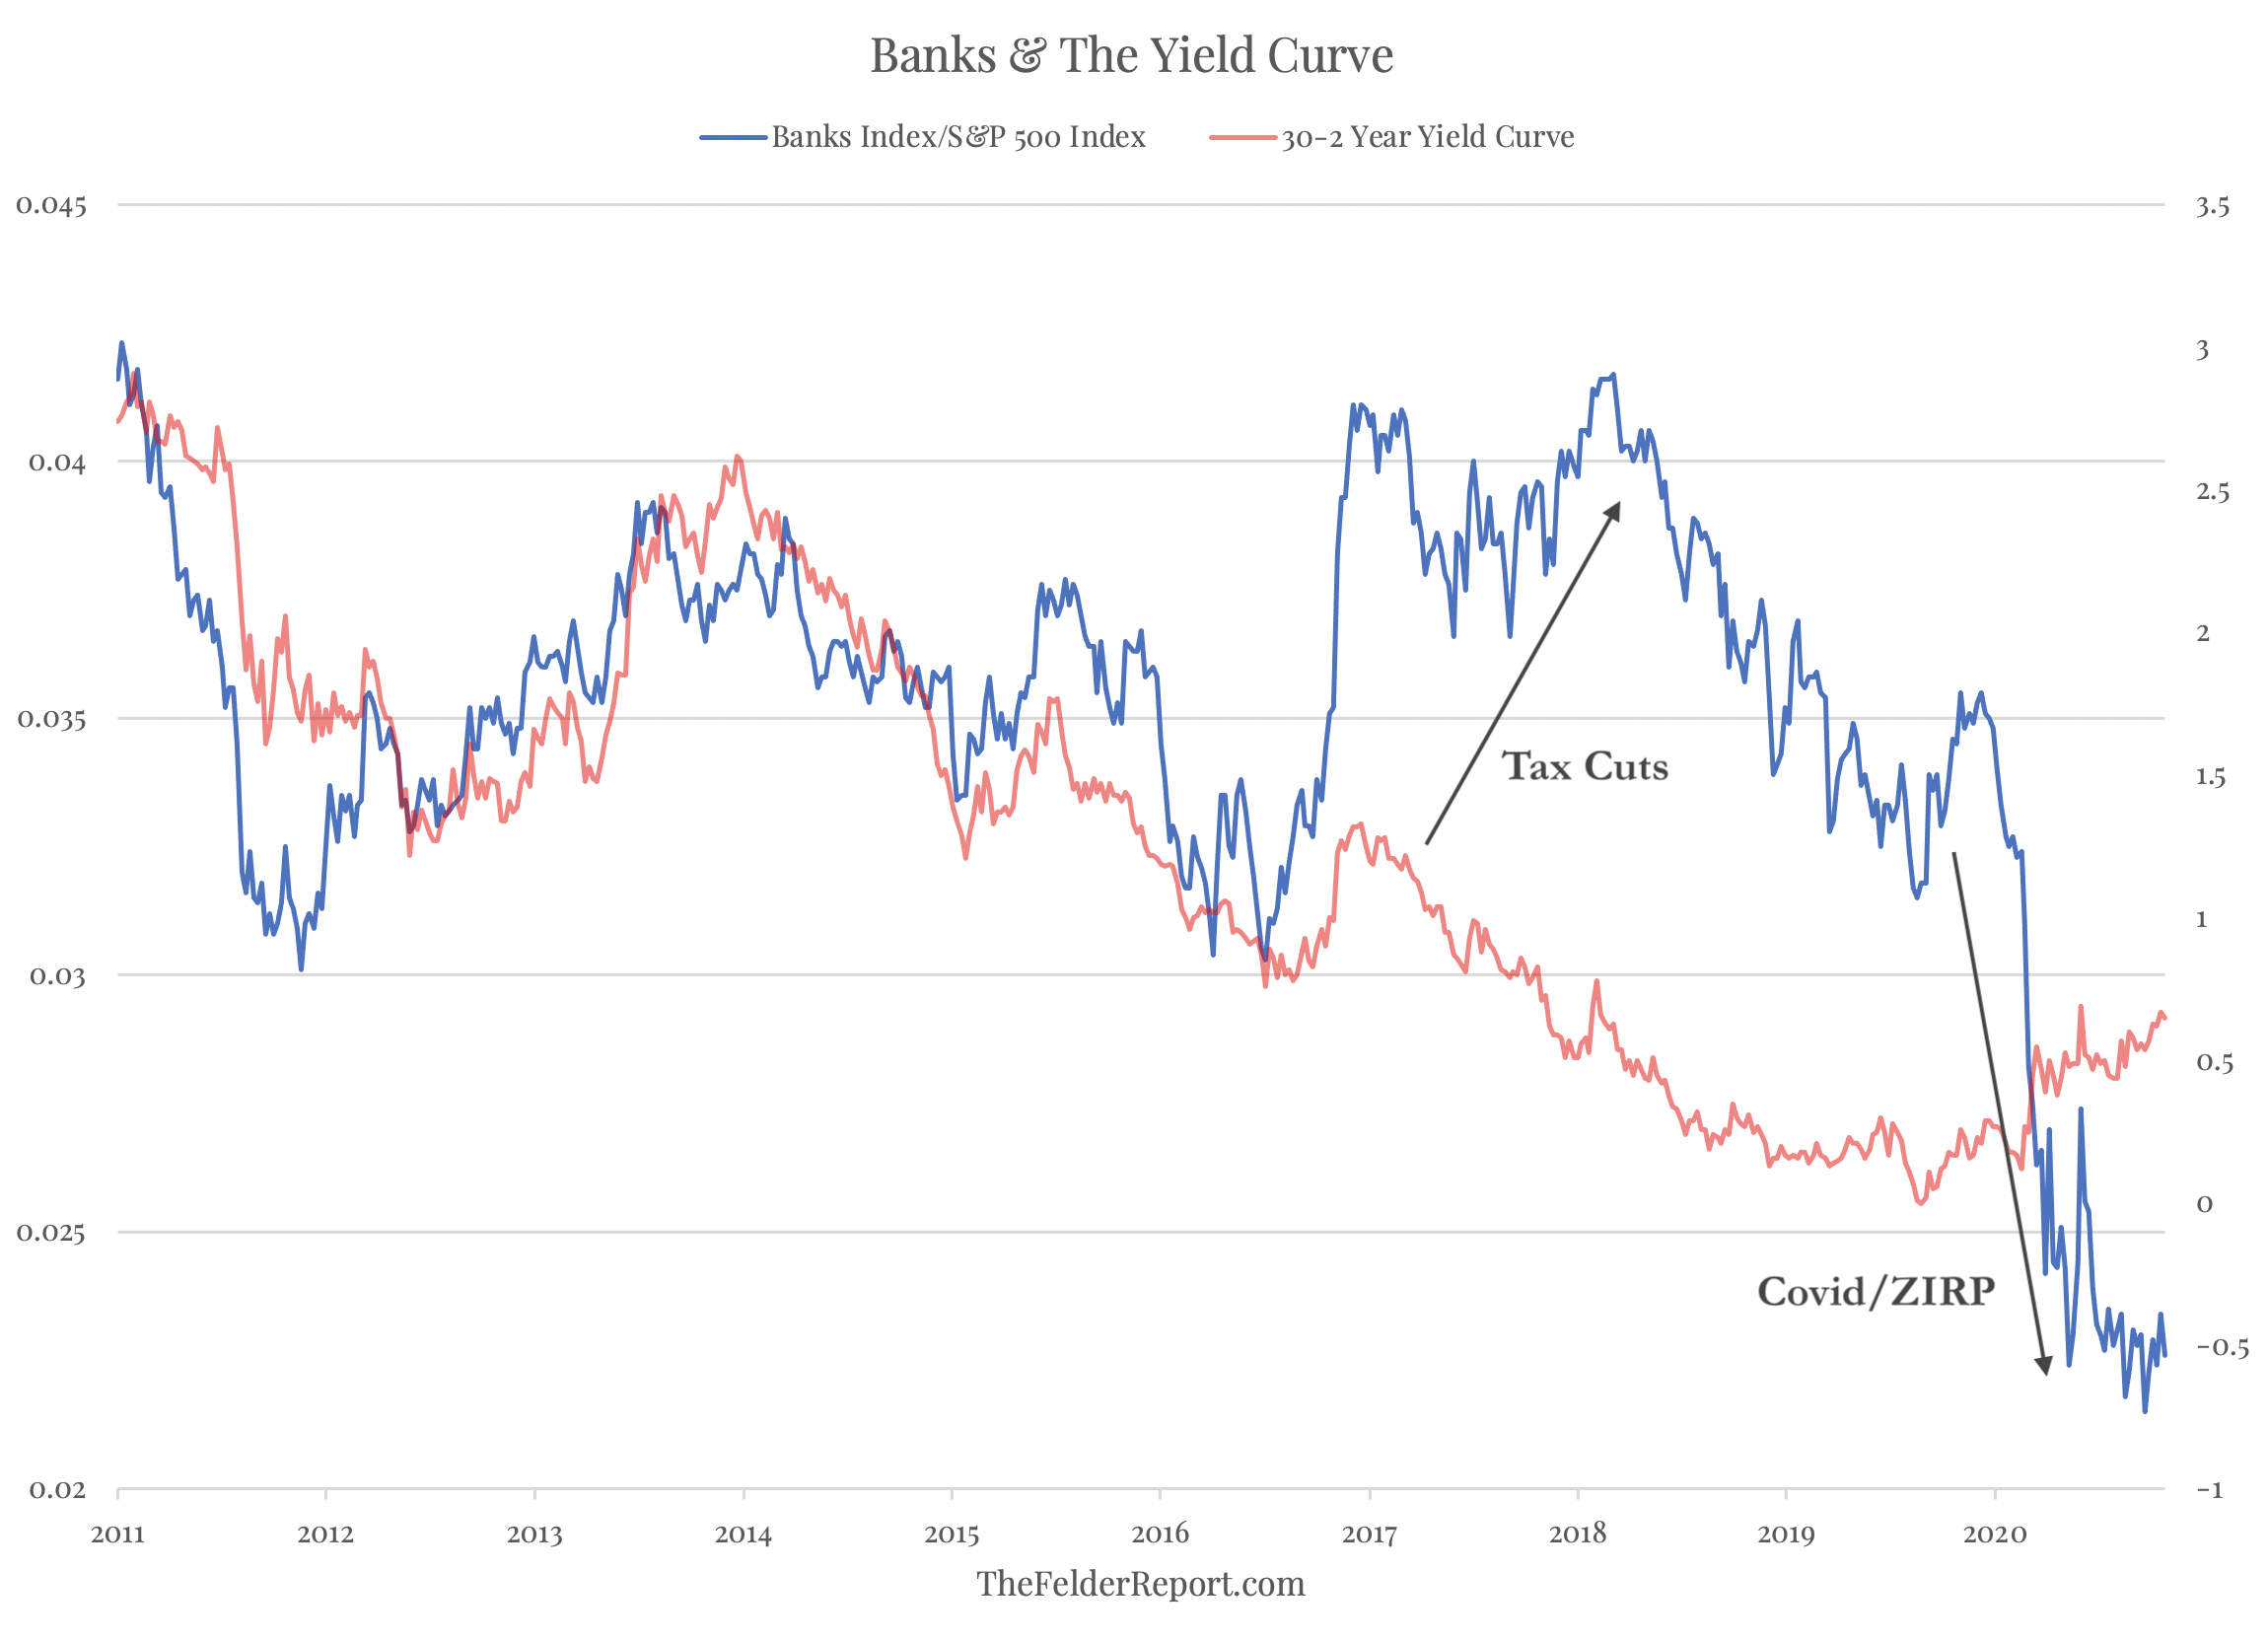 Banks & The Yield Curve Chart